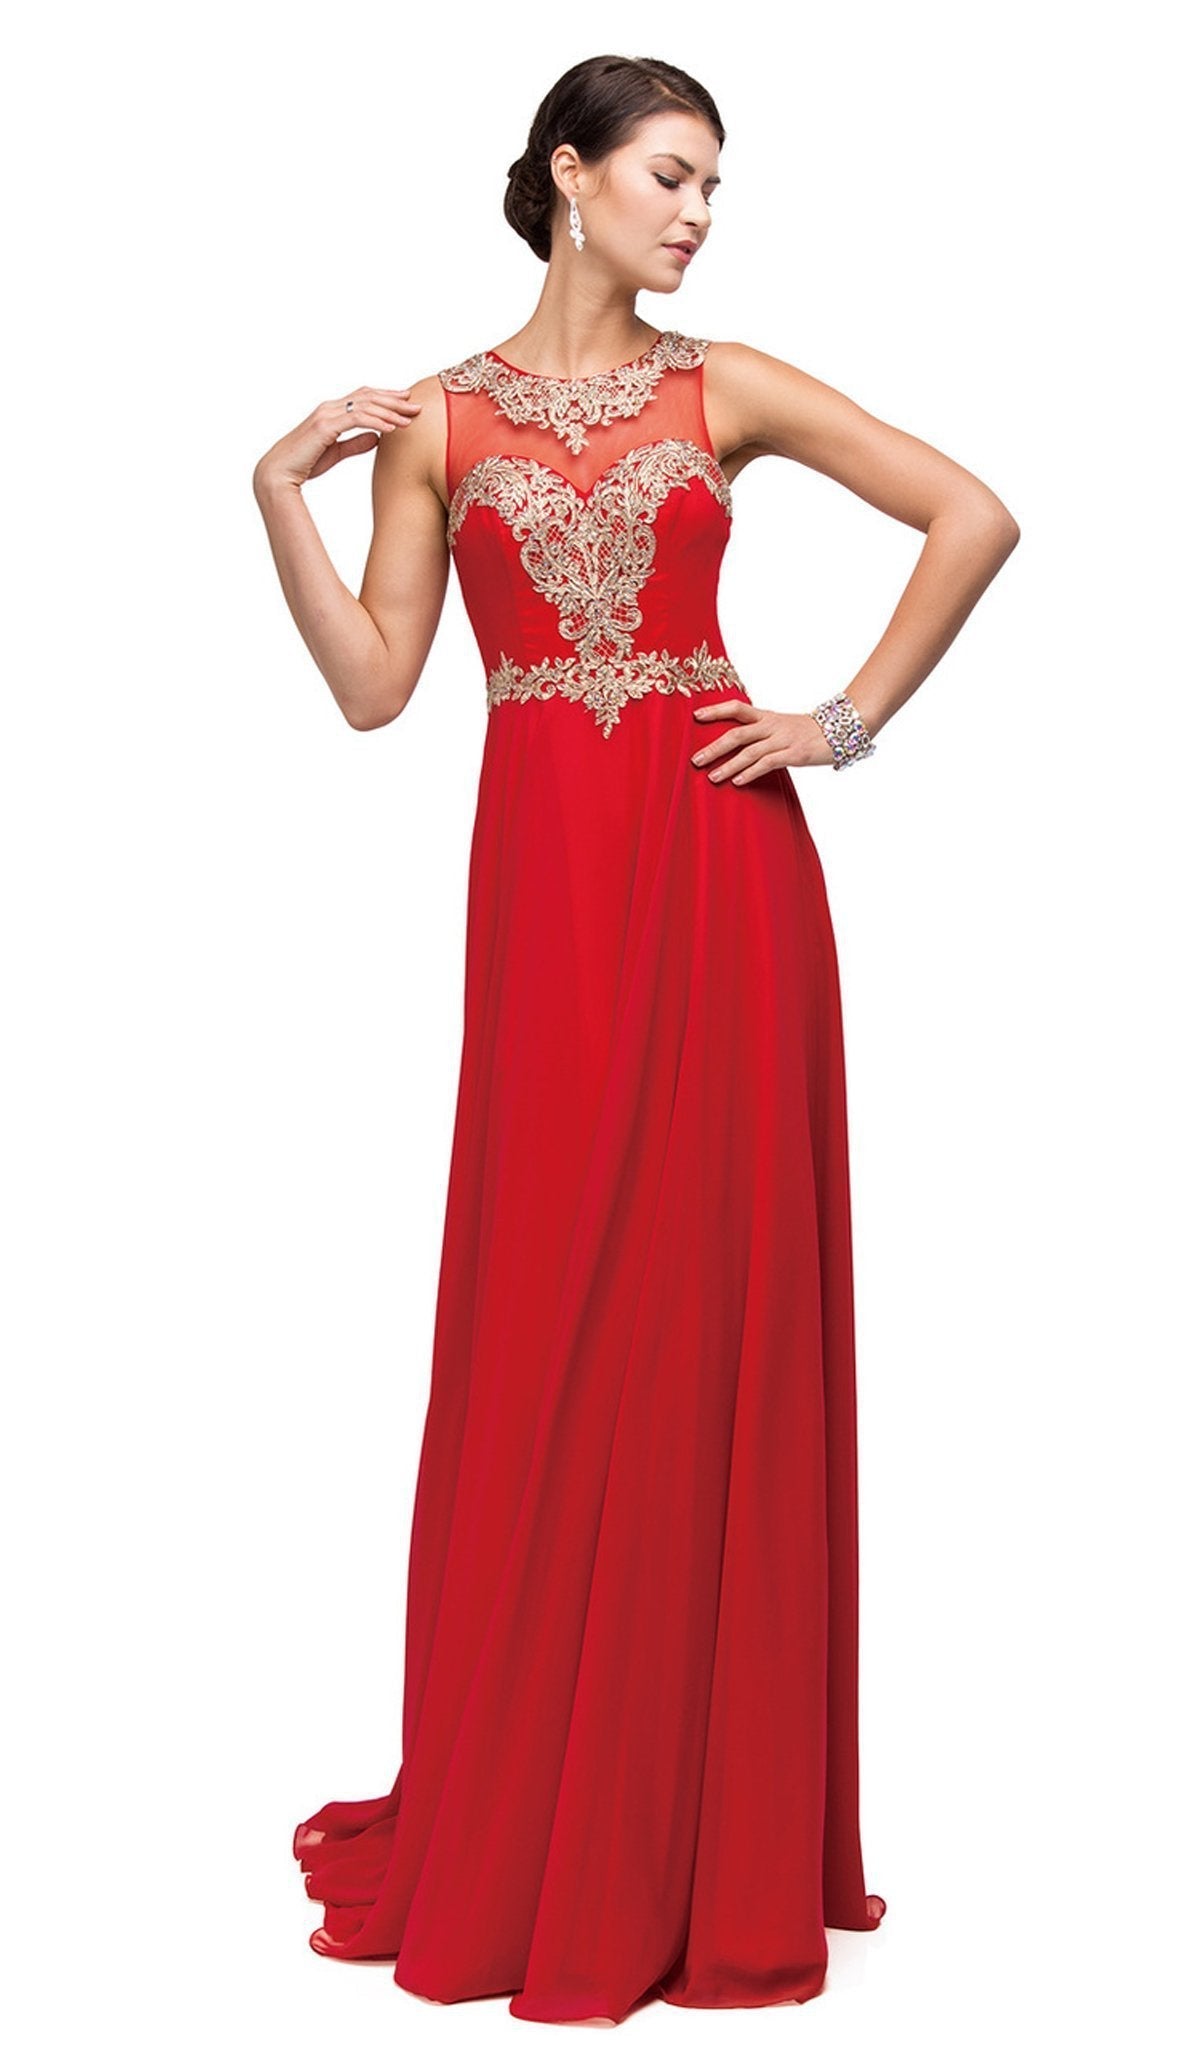 Dancing Queen - 9764 Gilded Lace Illusion A-Line Prom Dress Special Occasion Dress XS / Red